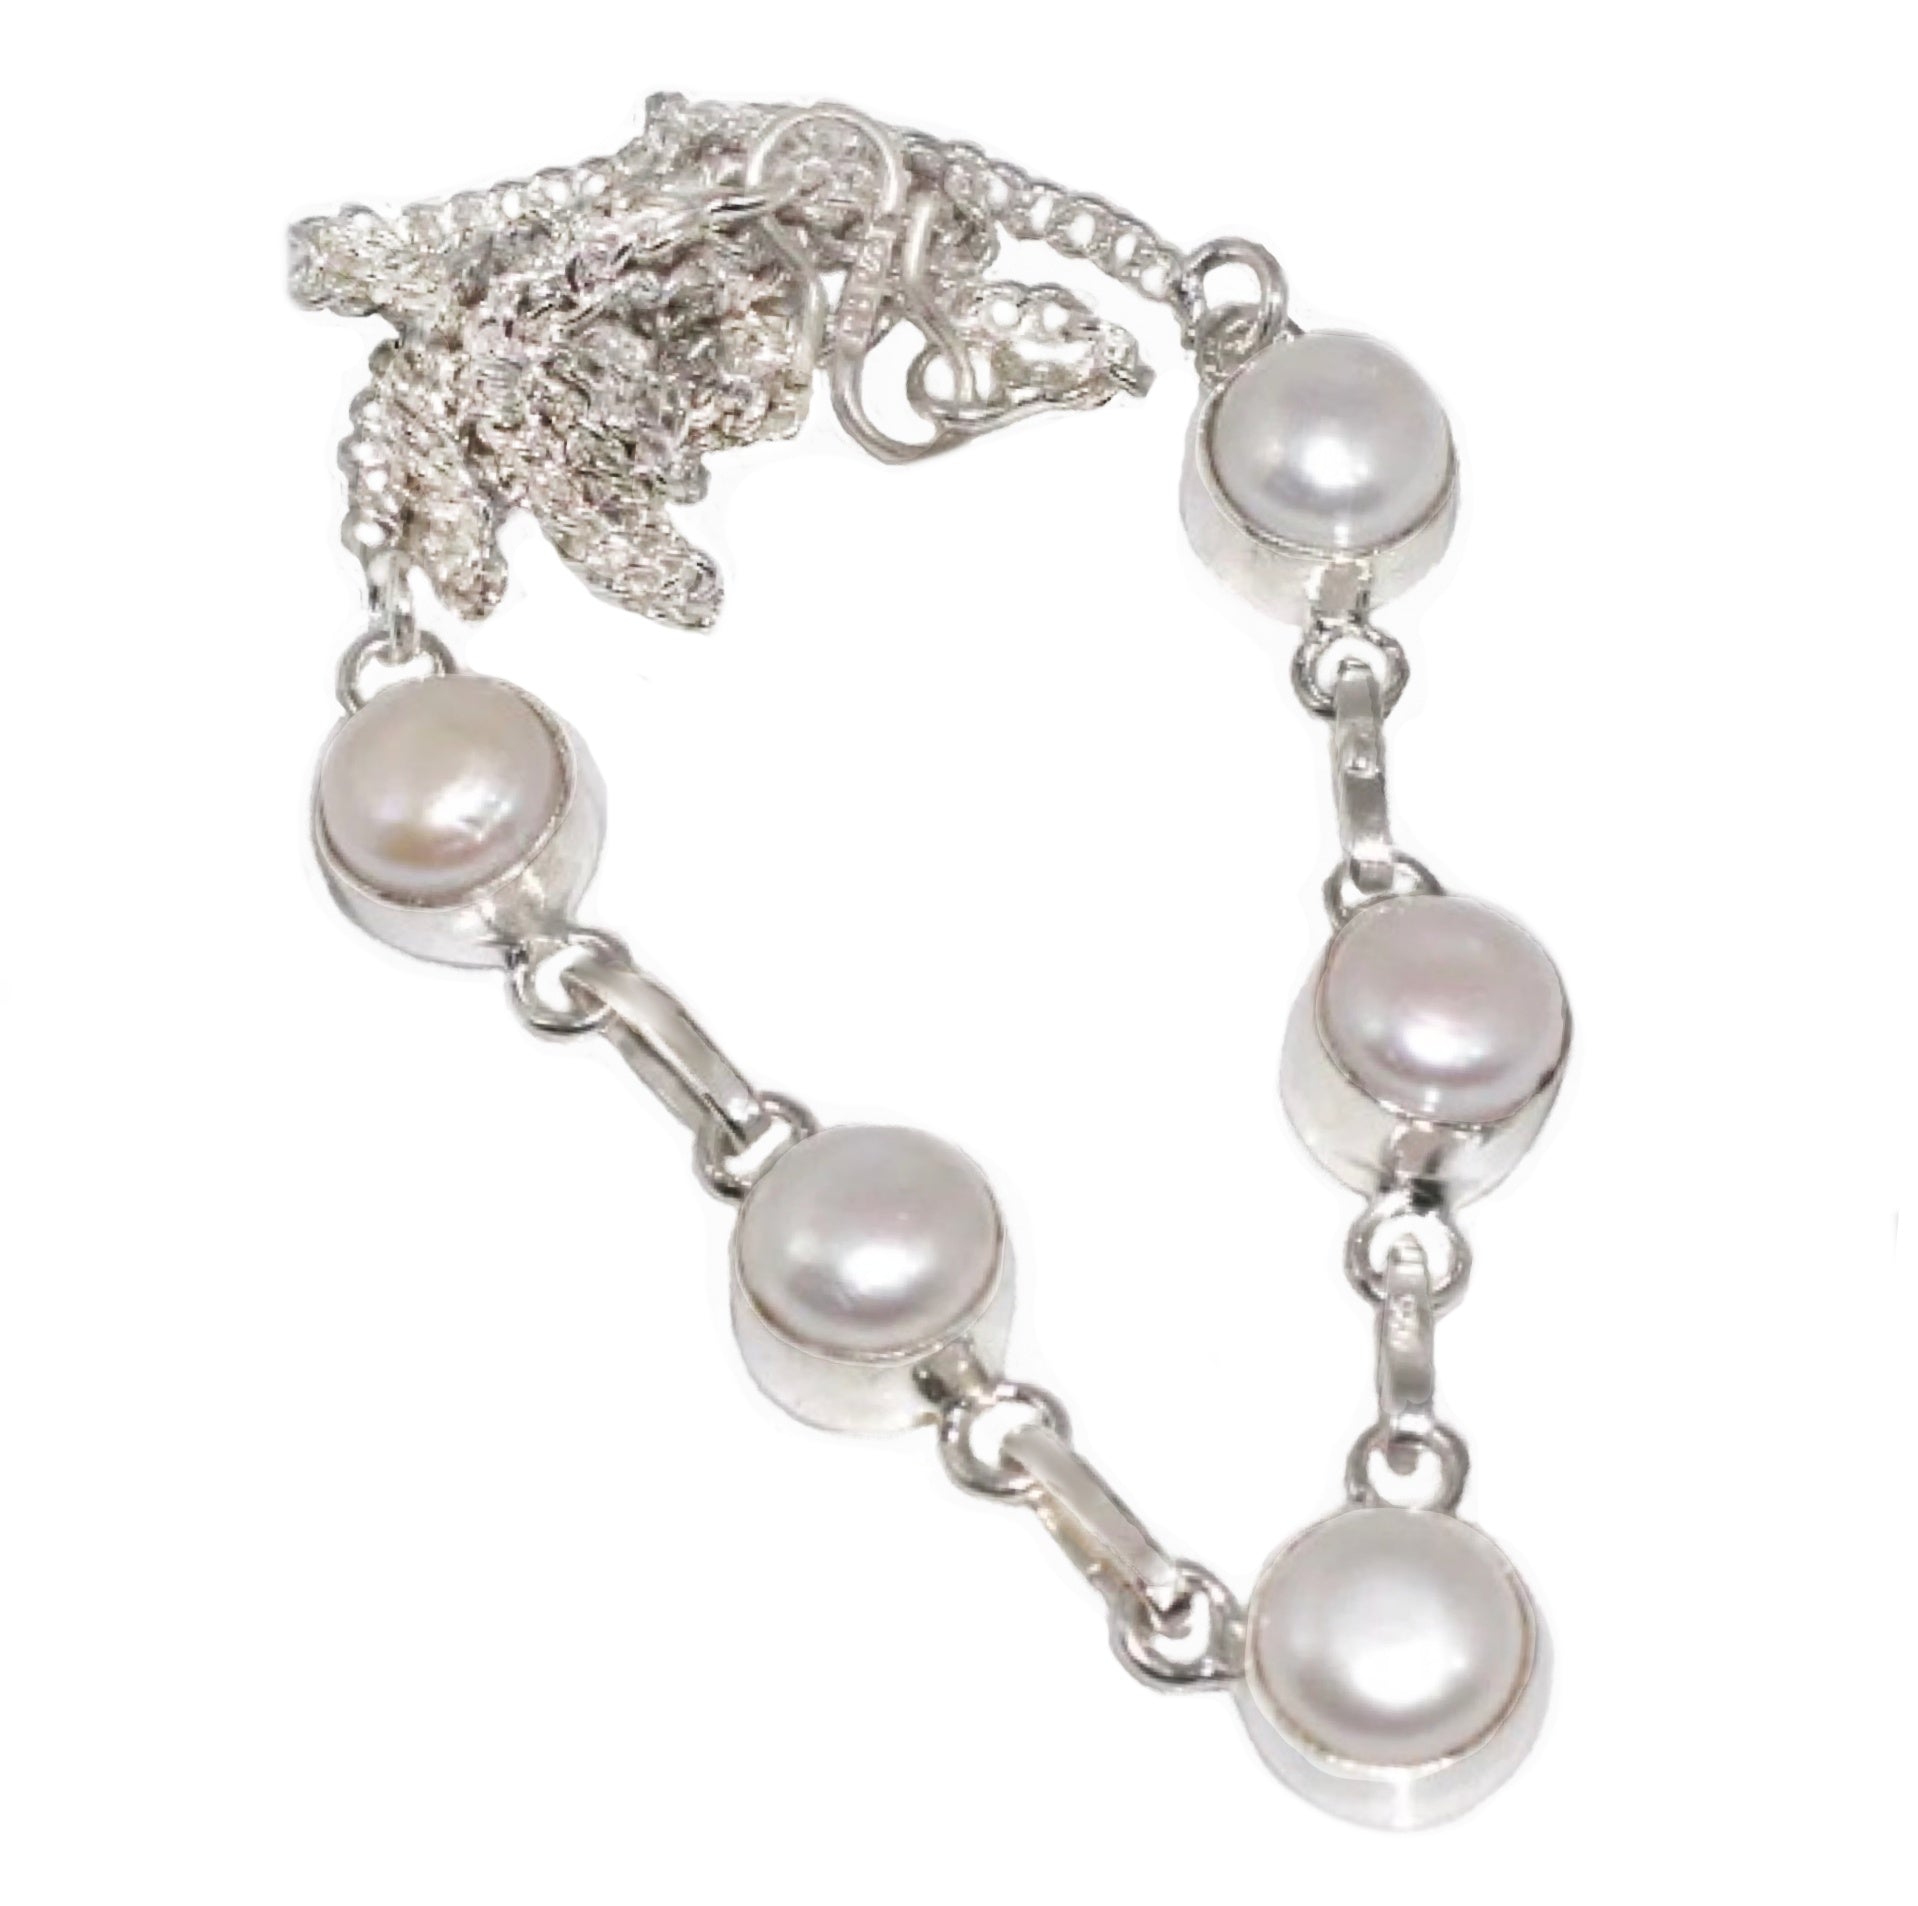 Dainty Handmade Creamy White River Pearl. 925 Sterling Silver Necklace